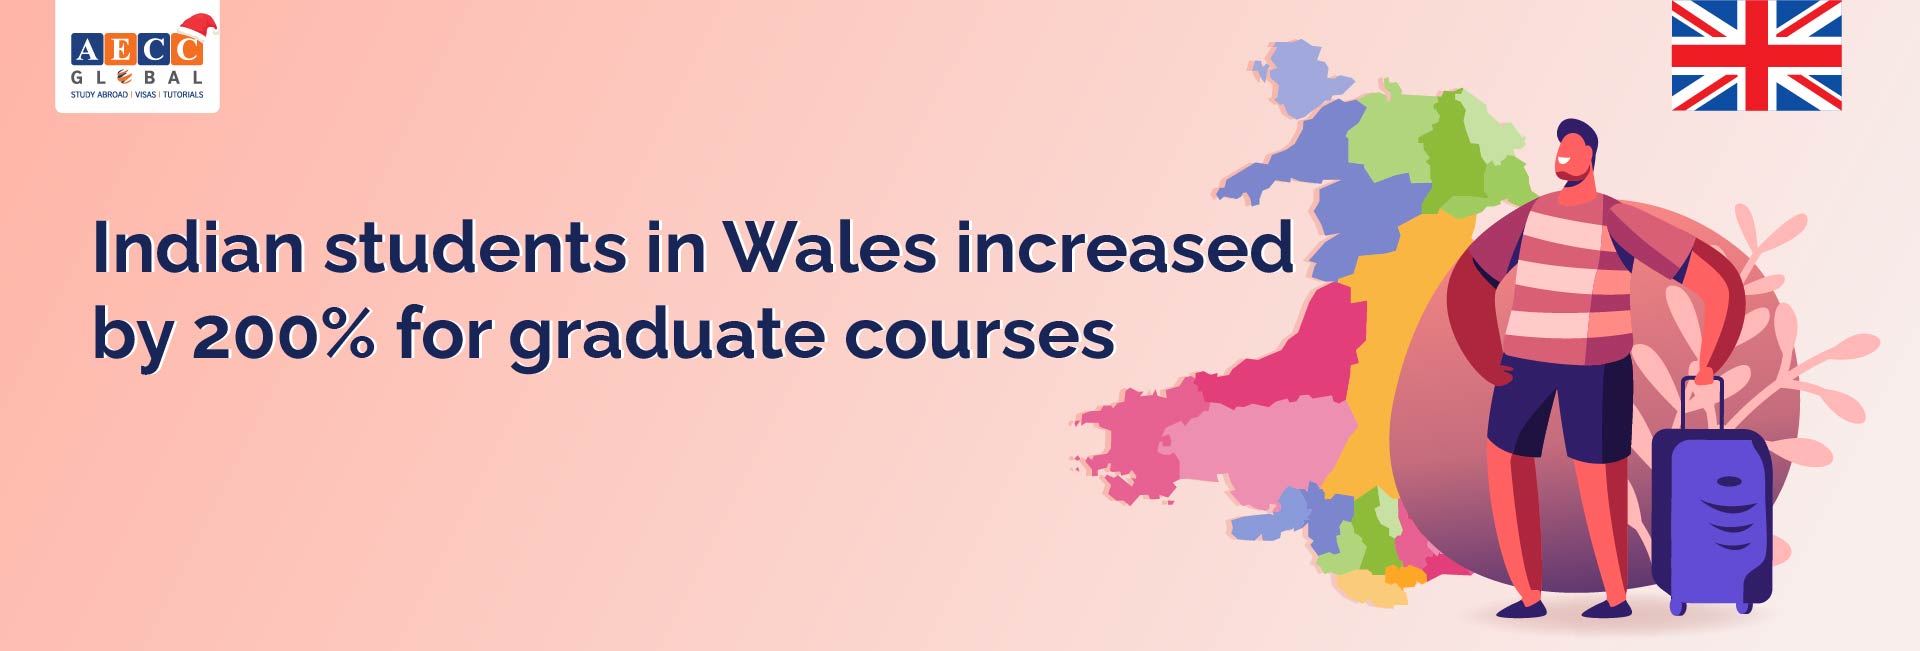 Indian students in Wales increased by 200% for graduate courses